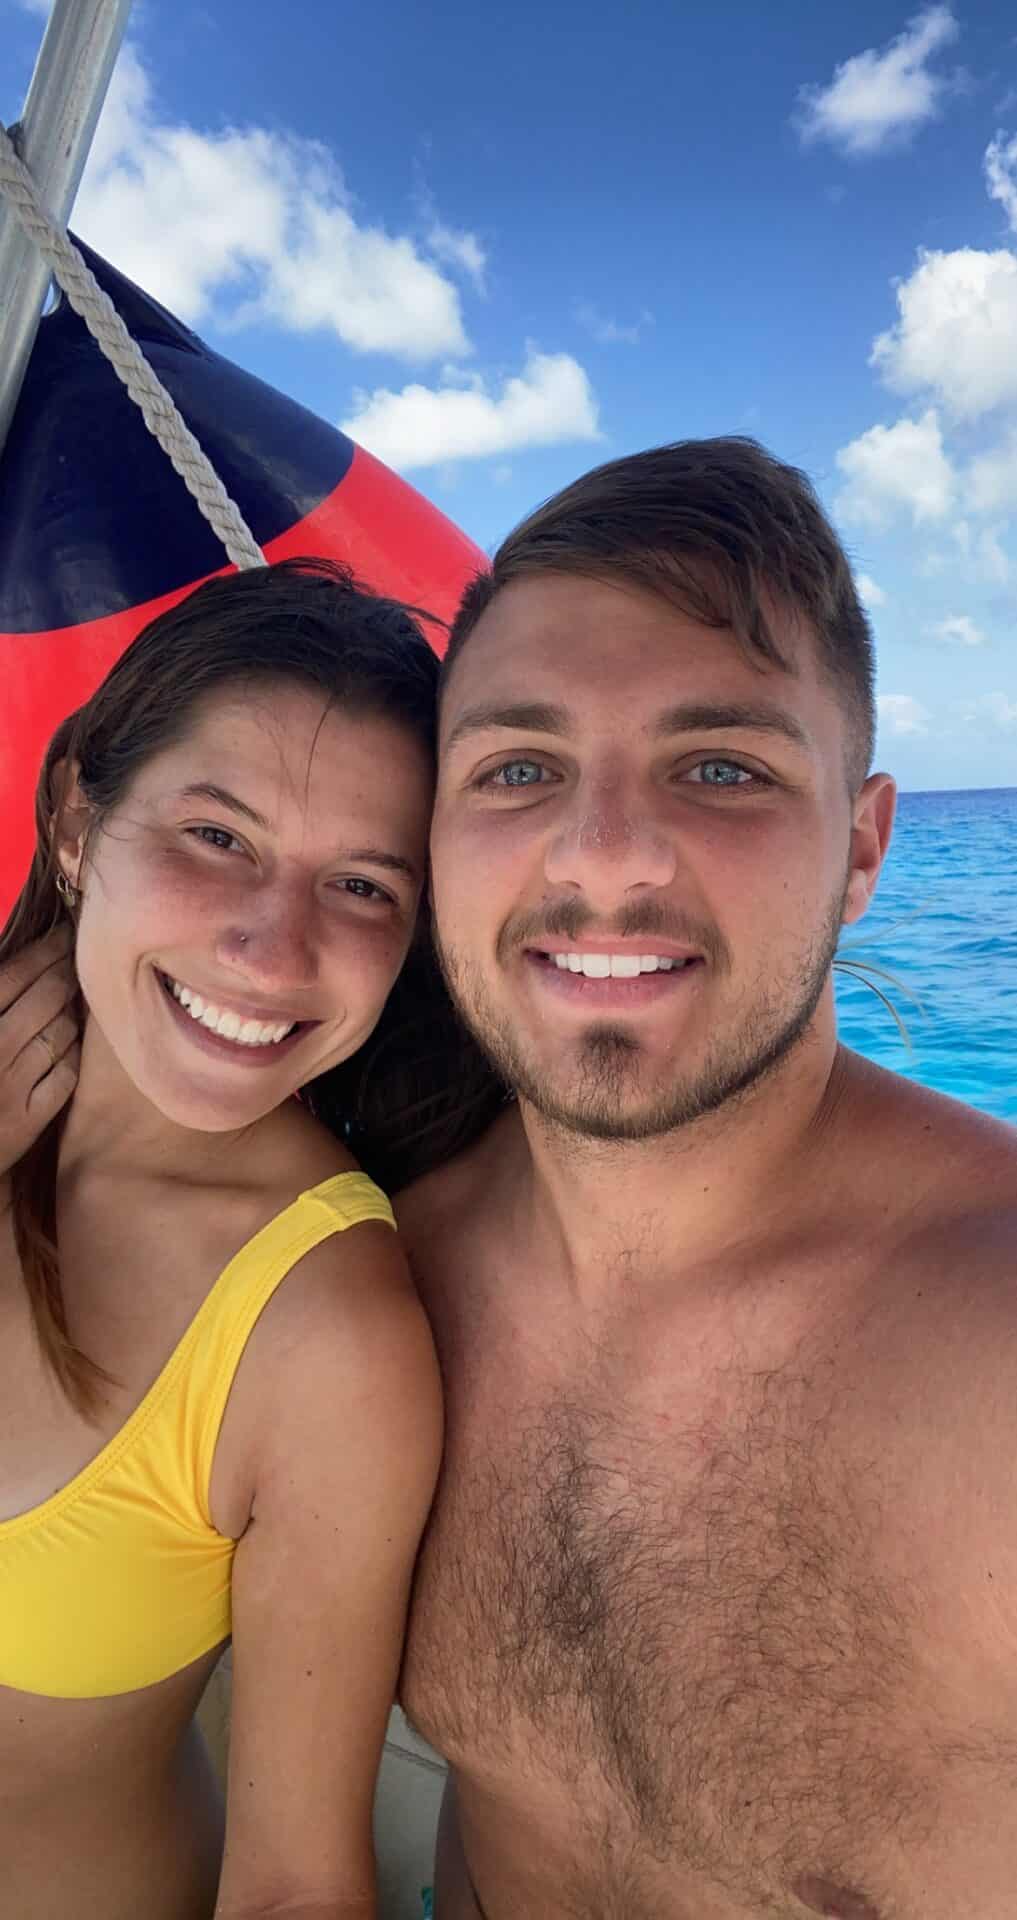 selfie of couple on a boat in the ocean